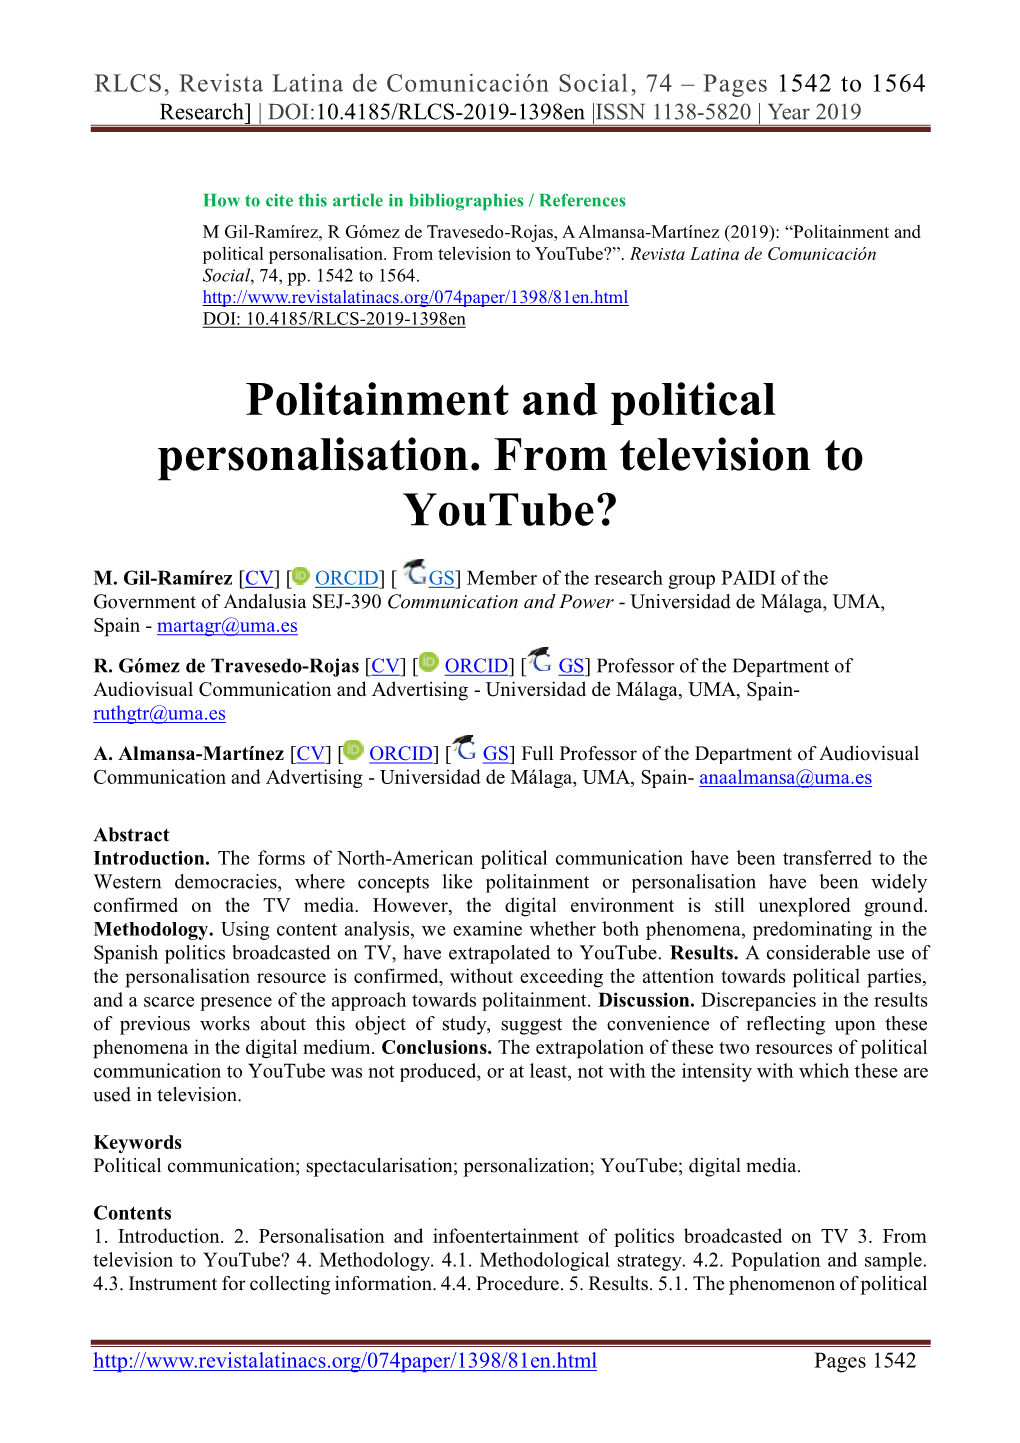 Politainment and Political Personalisation. from Television to Youtube?”